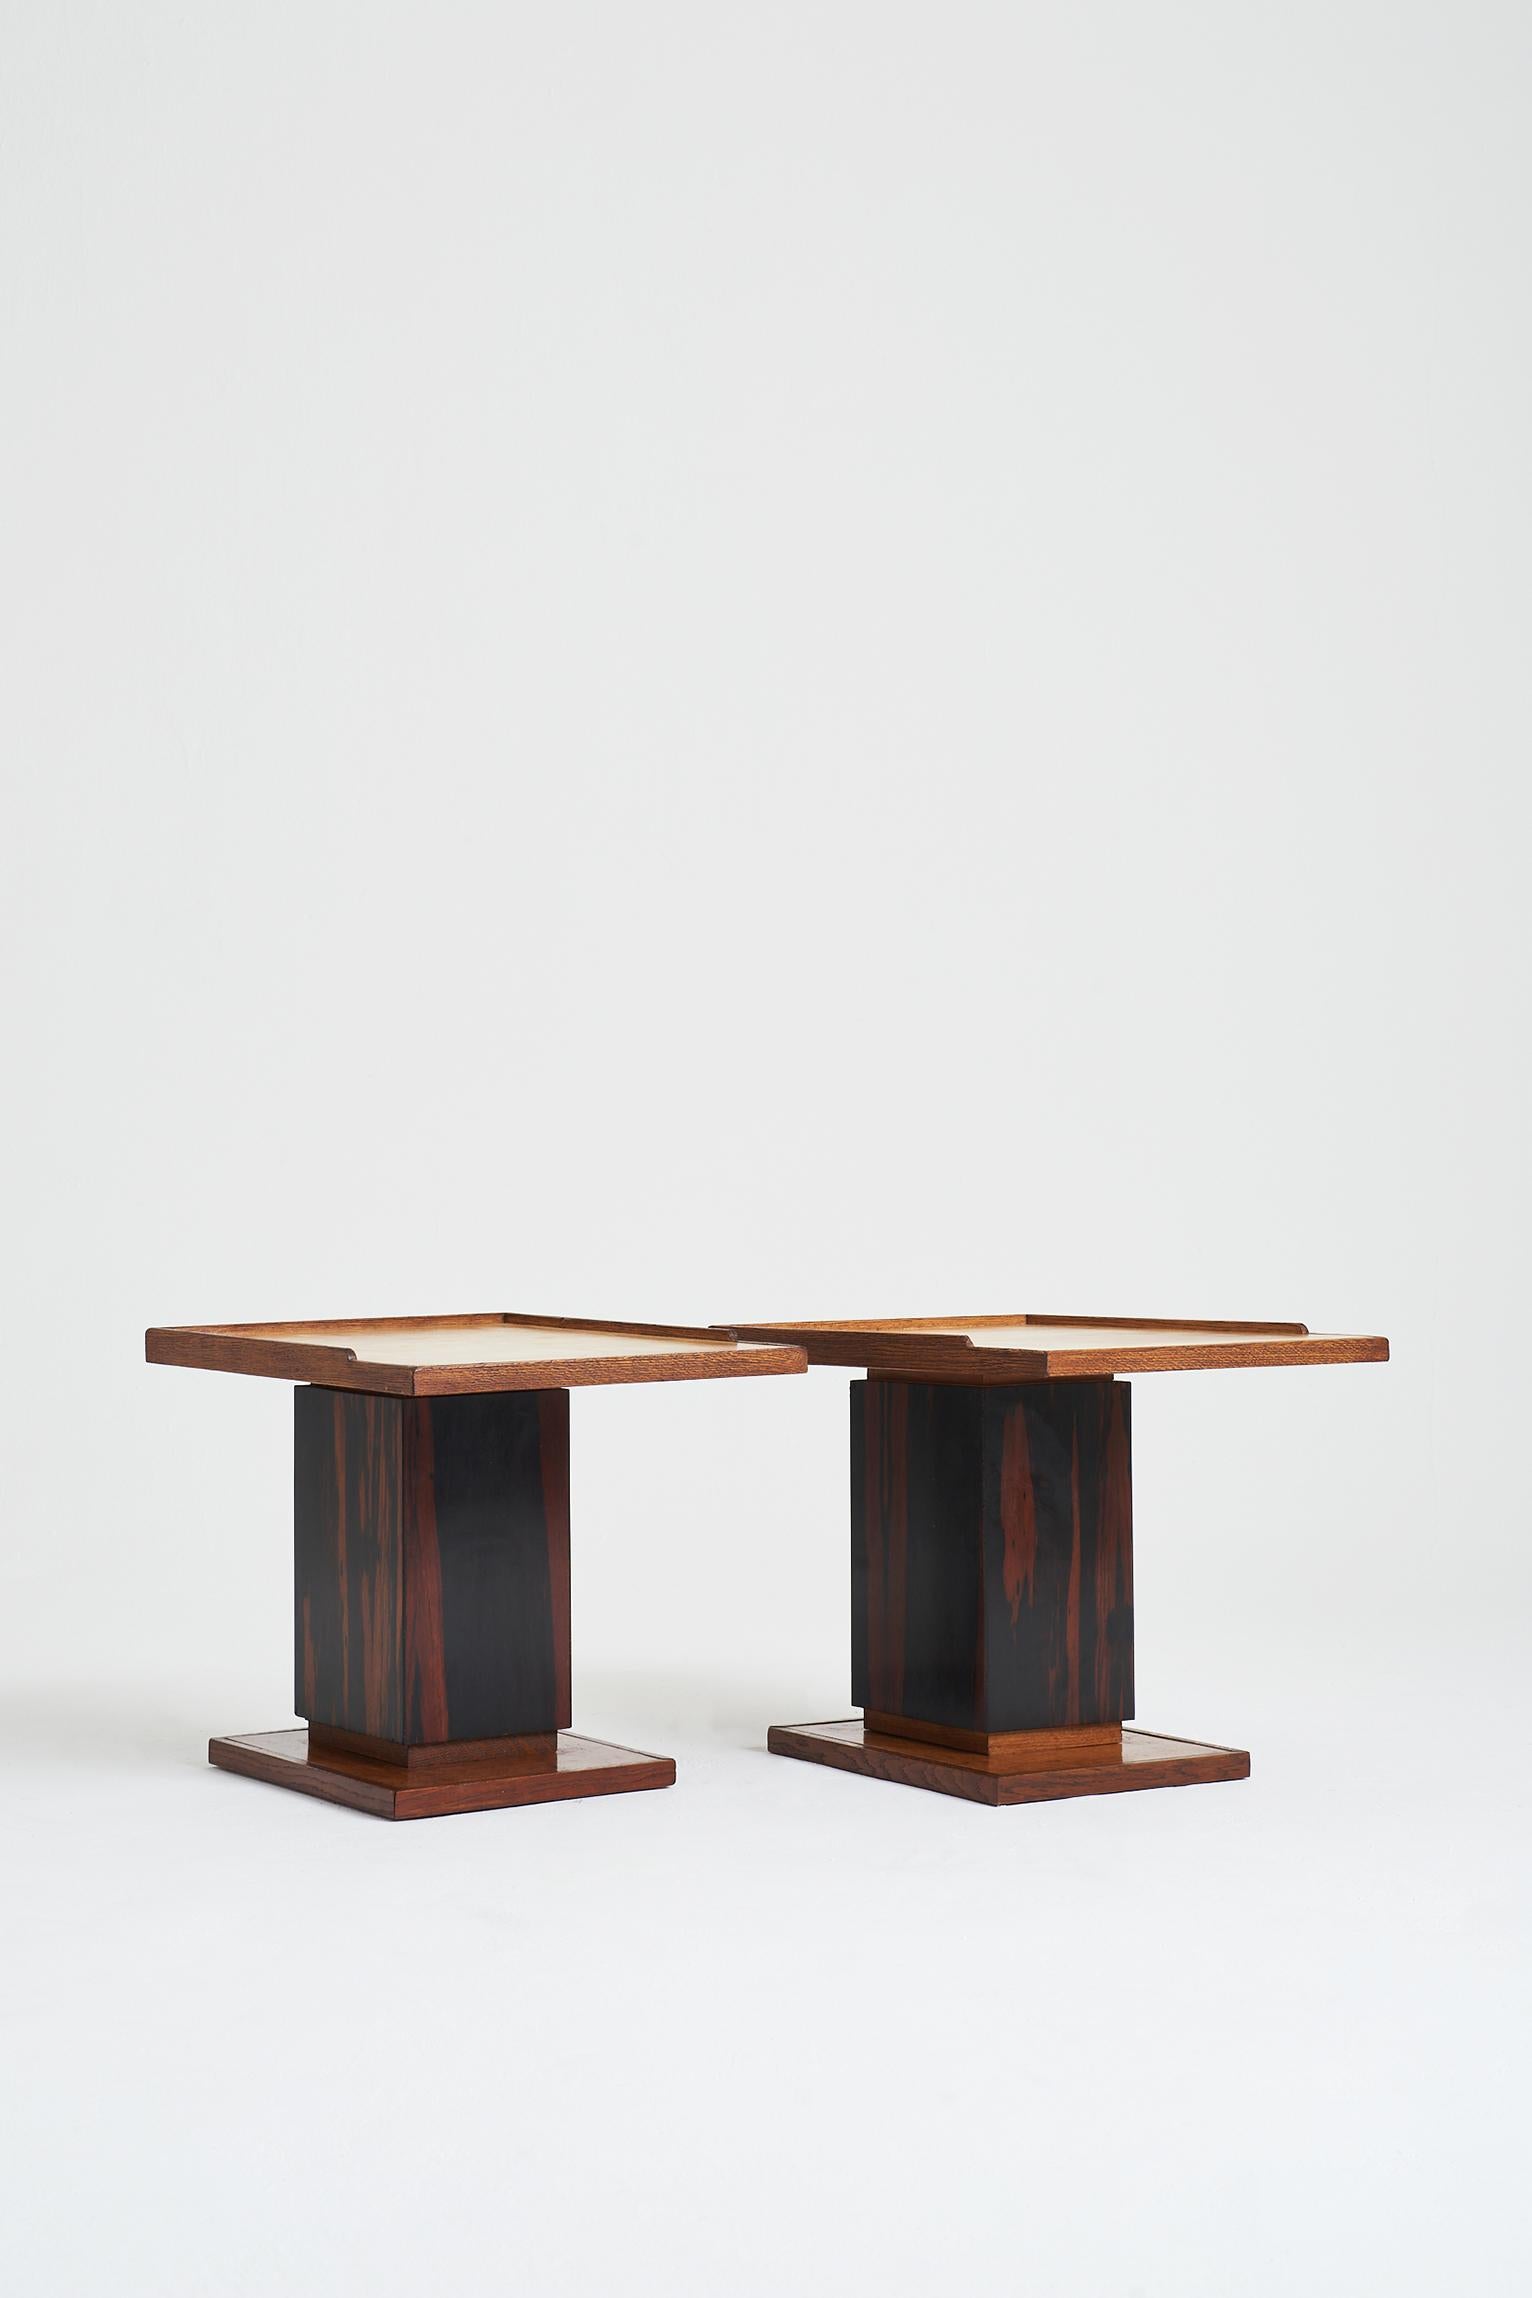 20th Century Pair of Velum Side Tables in the manner of Paul-Dupré Lafon